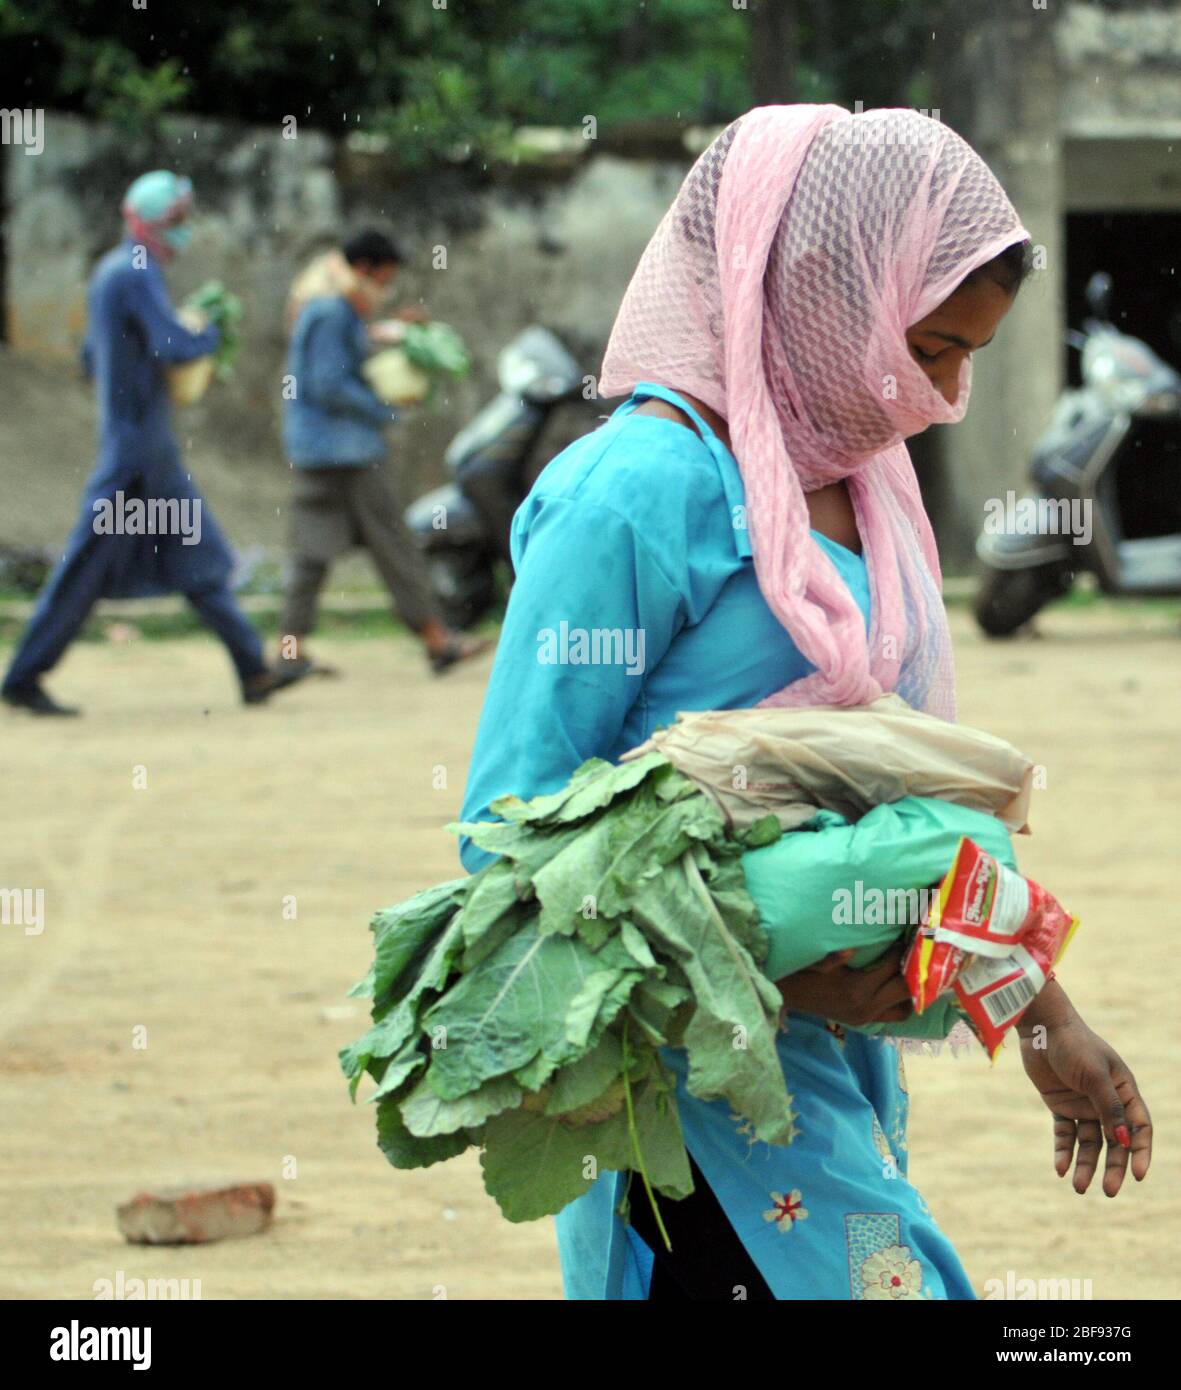 Jammu, Indian-controlled Kashmir. 17th Apr, 2020. A woman carries food distributed by police during the lockdown to contain the spread of novel coronavirus, in Jammu, the winter capital of Indian-controlled Kashmir, April 17, 2020. Credit: Str/Xinhua/Alamy Live News Stock Photo